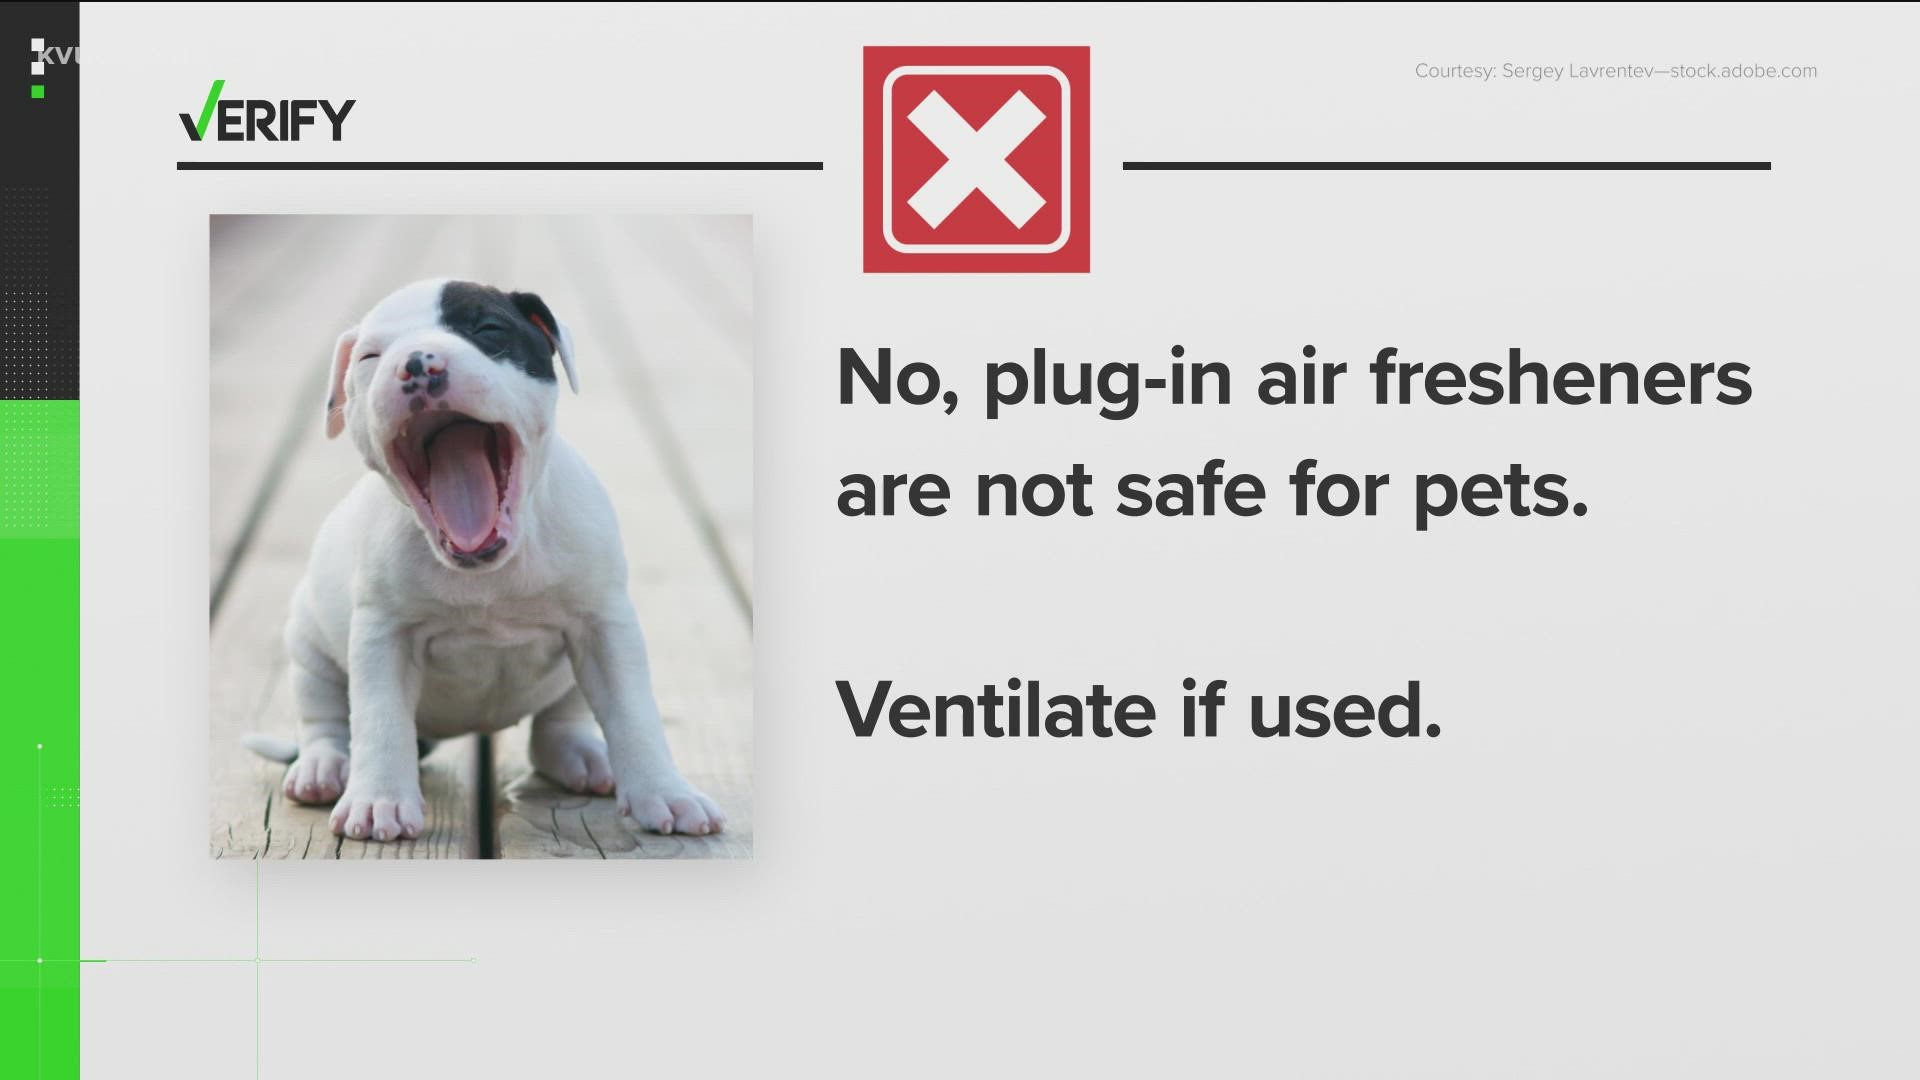 A viewer reached out regarding plug-in air fresheners and pet safety.